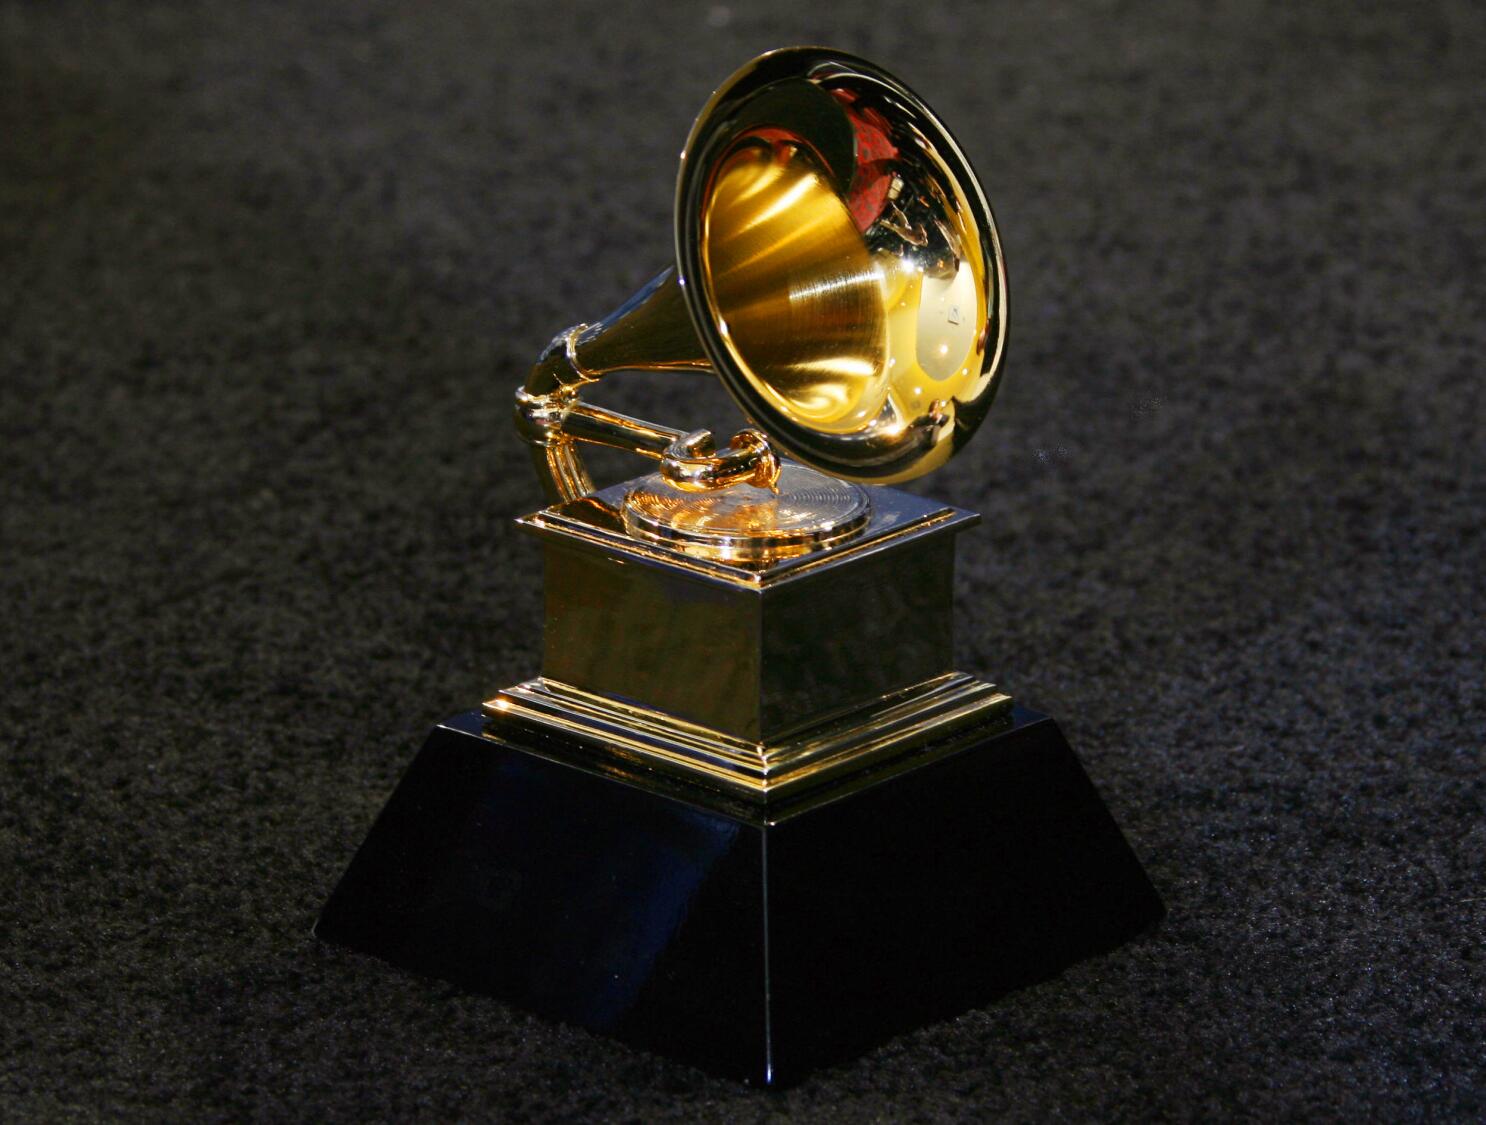 We are the official site of the GRAMMY Awards, Music's Biggest Night